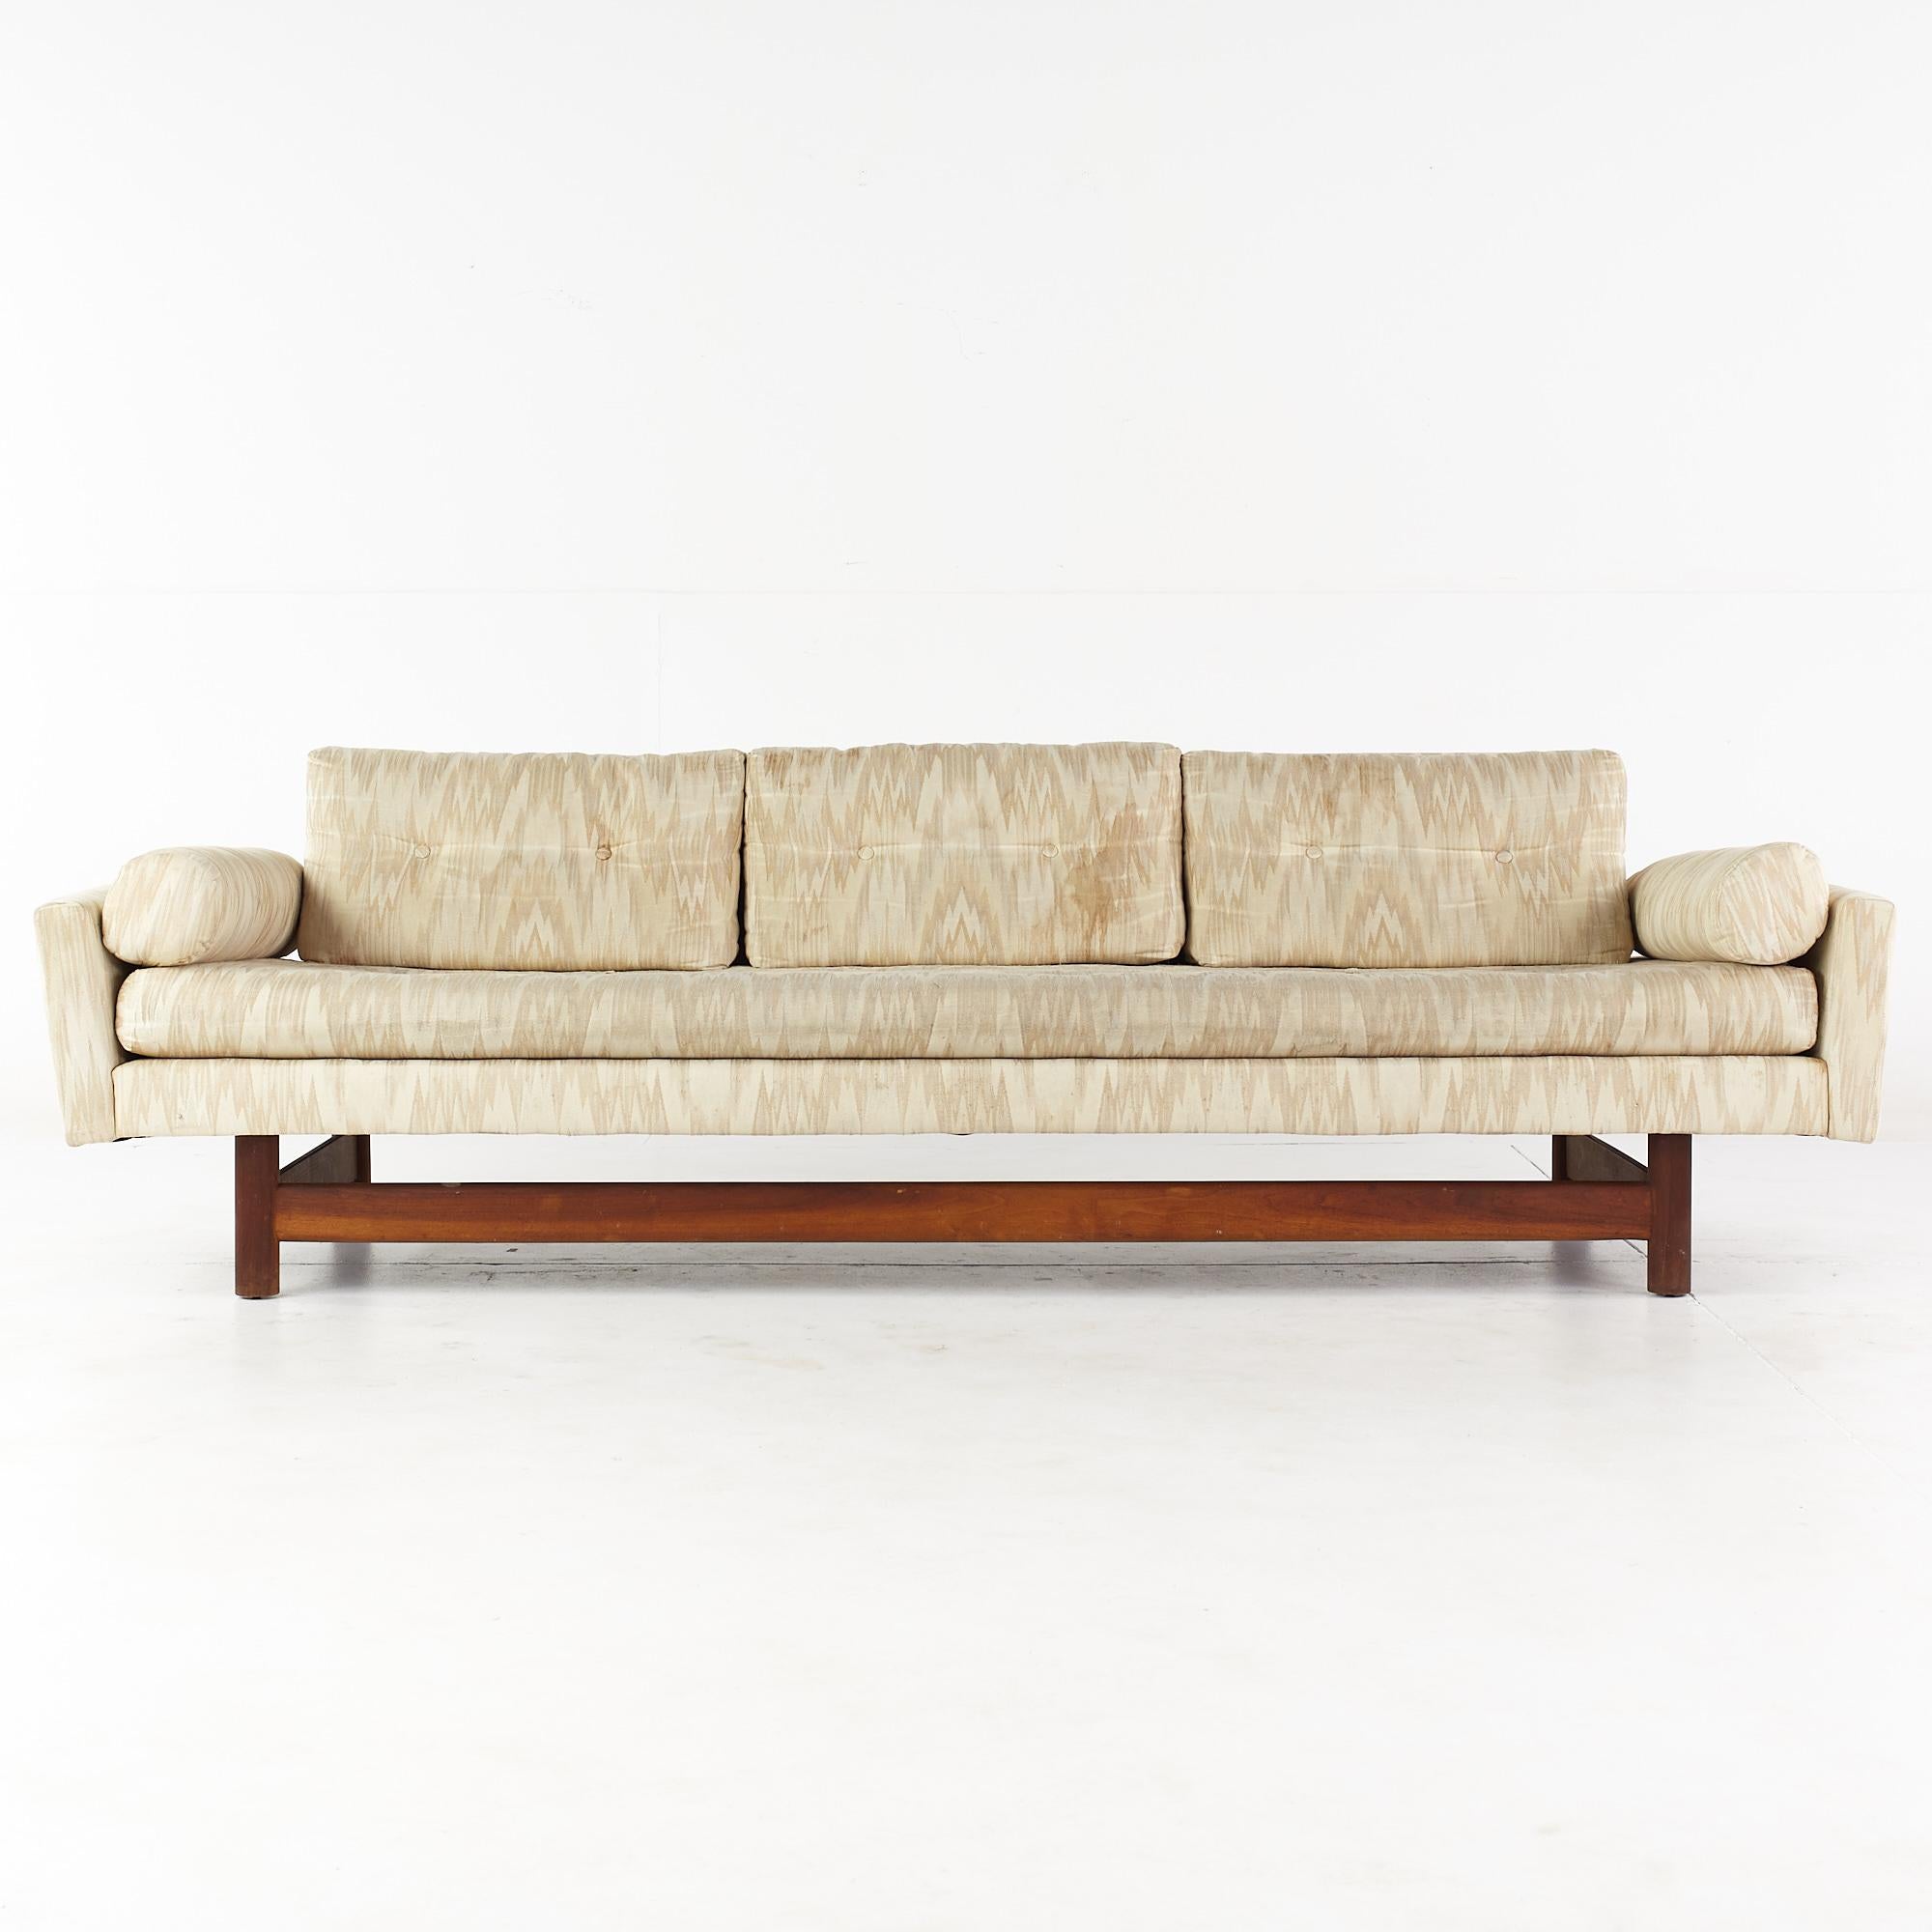 Adrian Pearsall Style Mid Century gondola sofa

This sofa measures: 88 wide x 33 deep x 26.5 inches high, with a seat height of 16 and arm height of 20 inches

Ready for new upholstery. This service is available for an additional fee.

All